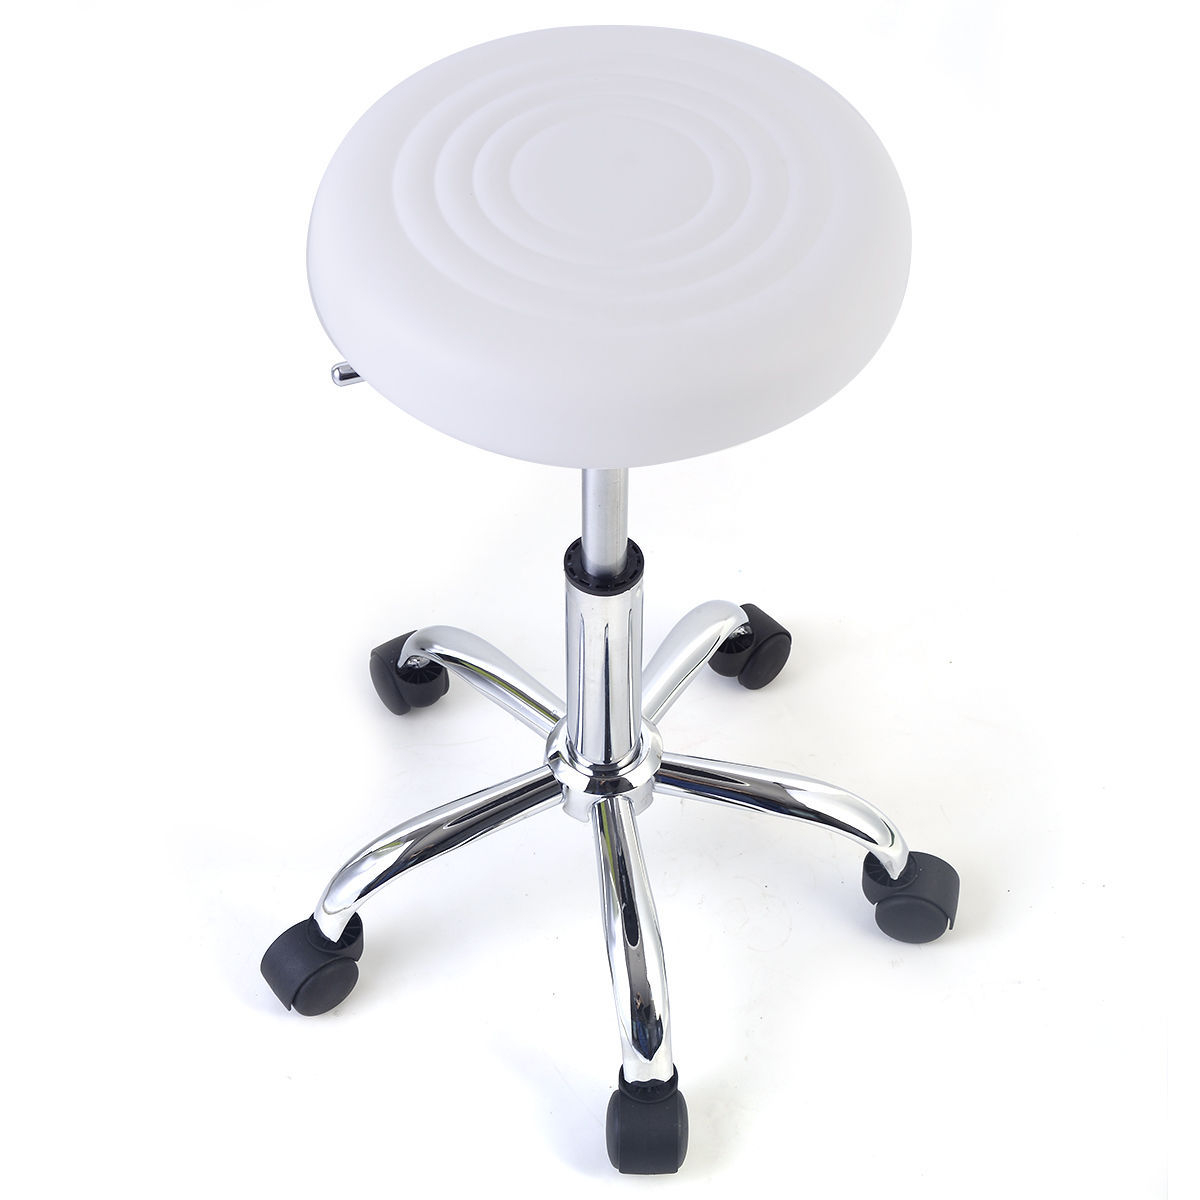 Super buy Adjustable 5 Wheels Hydraulic Rolling Swivel Stool Chair Tattoo Facial Massage Spa 250lbs Capacity White